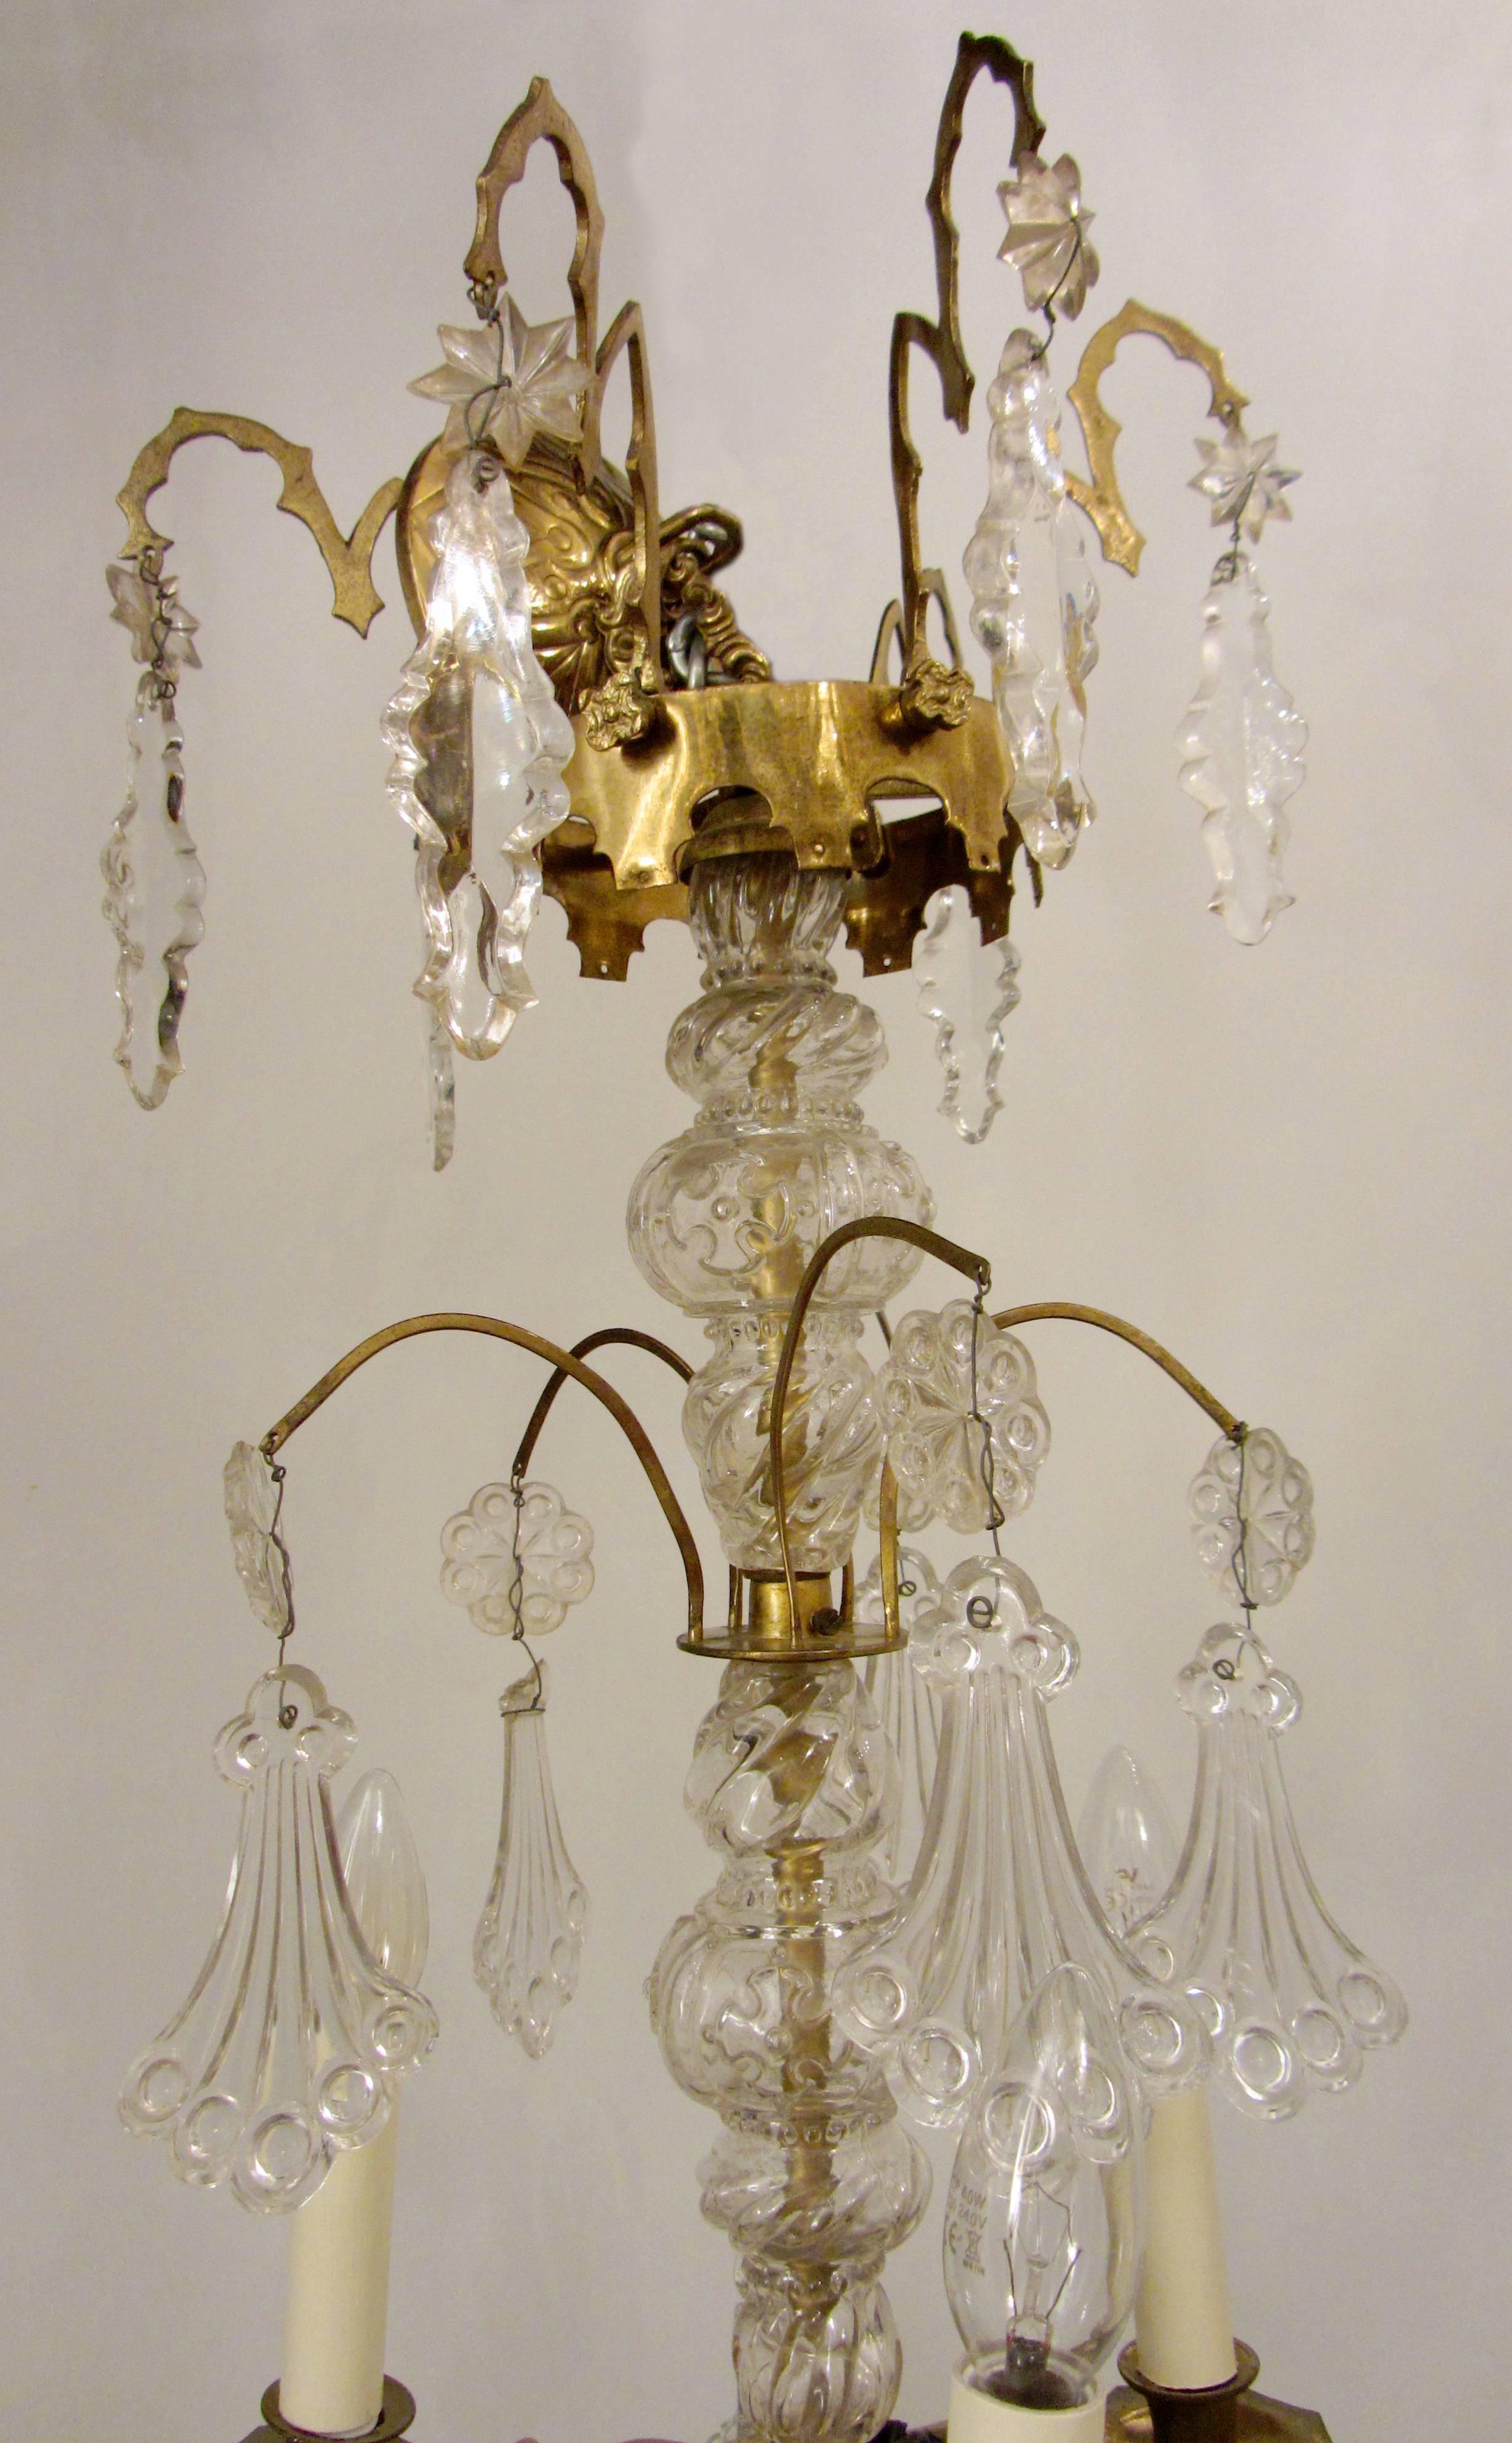 A beautiful Gothic revival, gilt bronze and crystal chandelier. The cut-glass encased stem is interspersed with splays and eight arms of light spread over two tiers. The frame is profusely hung with exquisite 'peacock tail' crystal pendants and